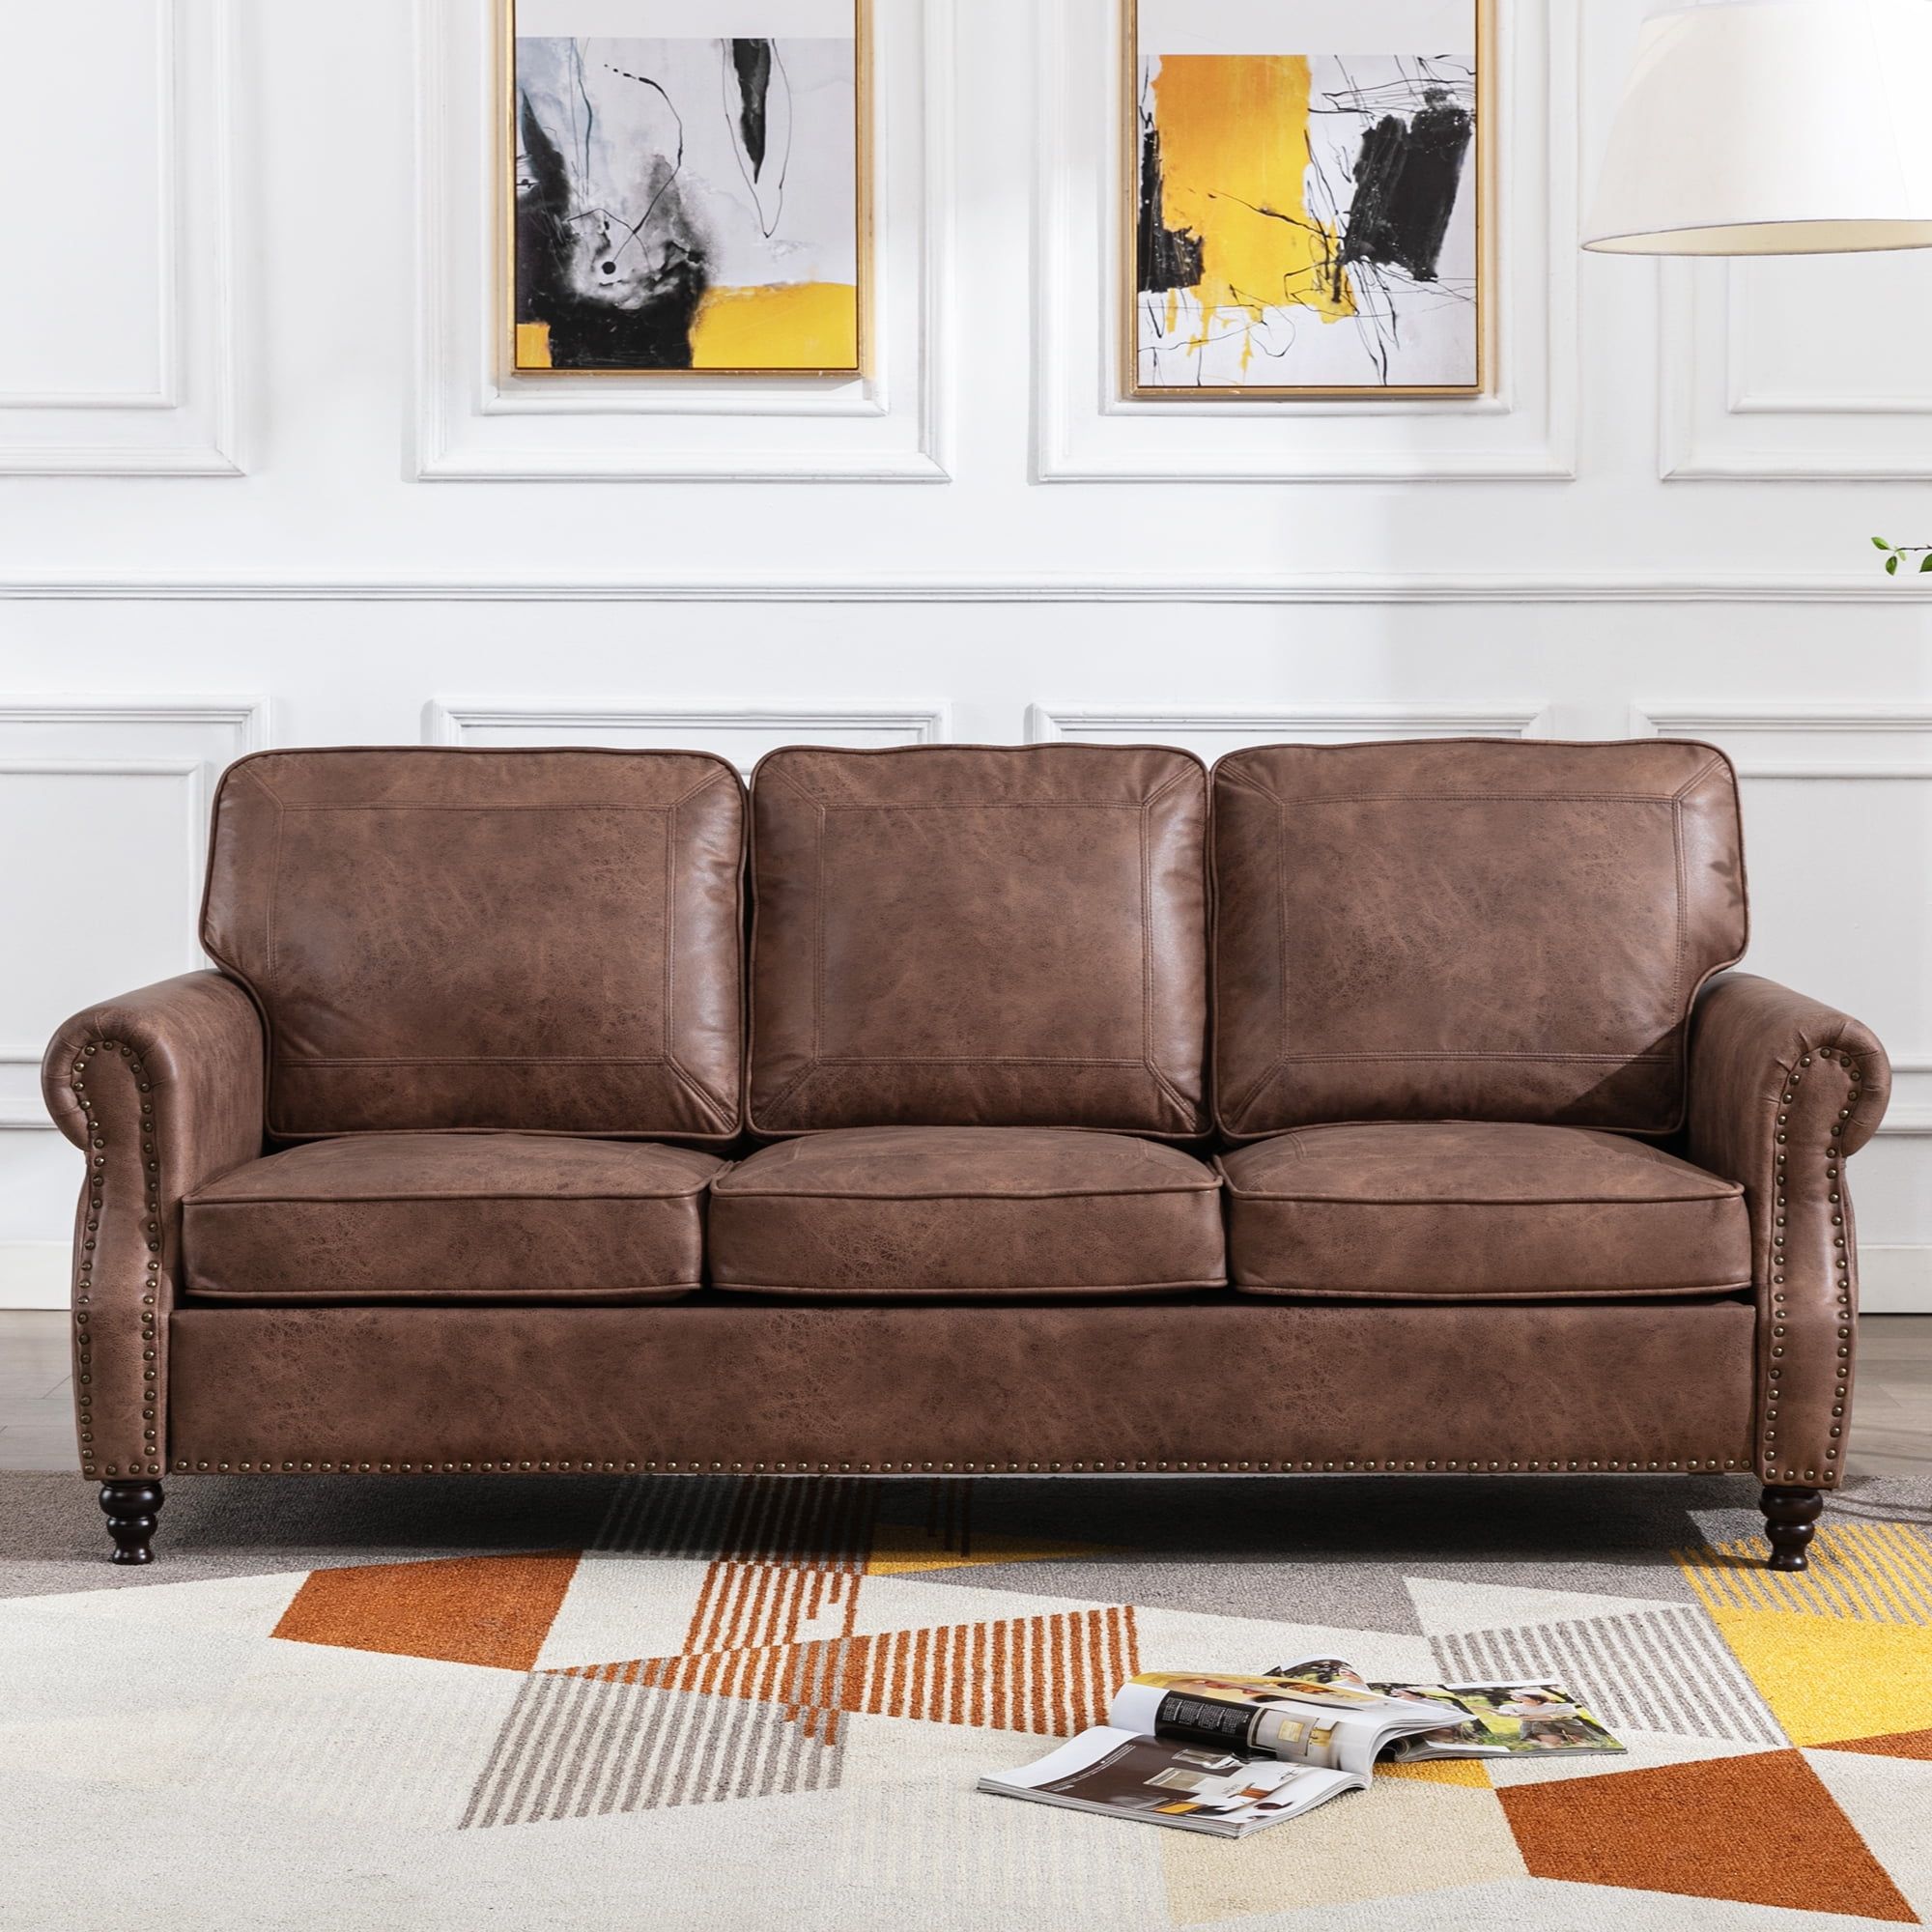 Dreamsir 80" Faux Leather Sofa Couch – Traditional 3 Seater With Nailhead  Trim, Rolled Arms, And Easy Assembly (dark Brown) – Walmart Within Faux Leather Sofas In Chocolate Brown (Photo 1 of 15)